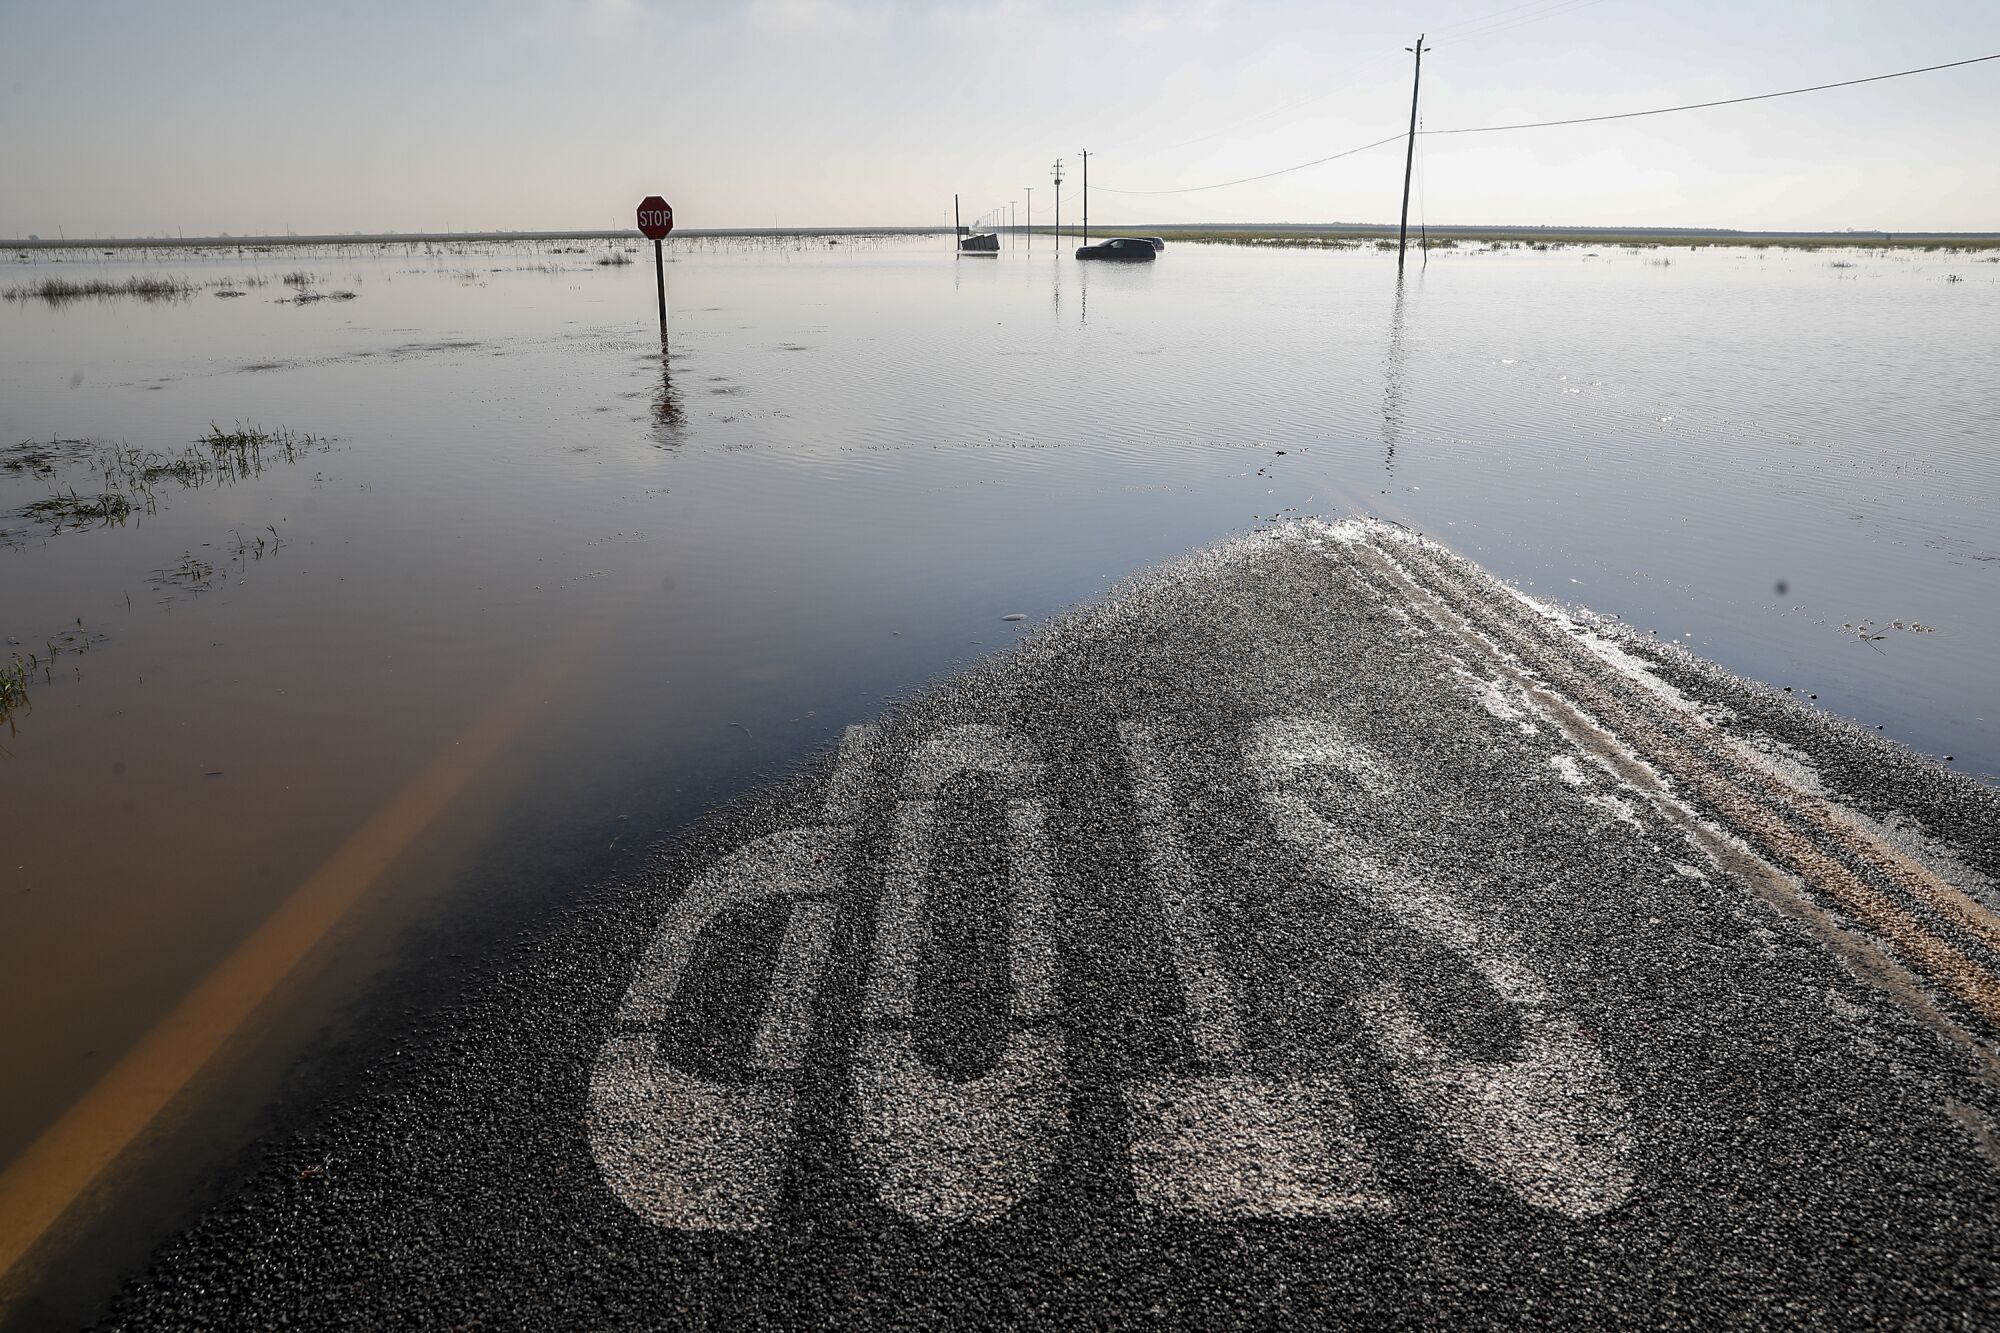 Vehicles are submerged in floodwaters on a road with a stop sign.